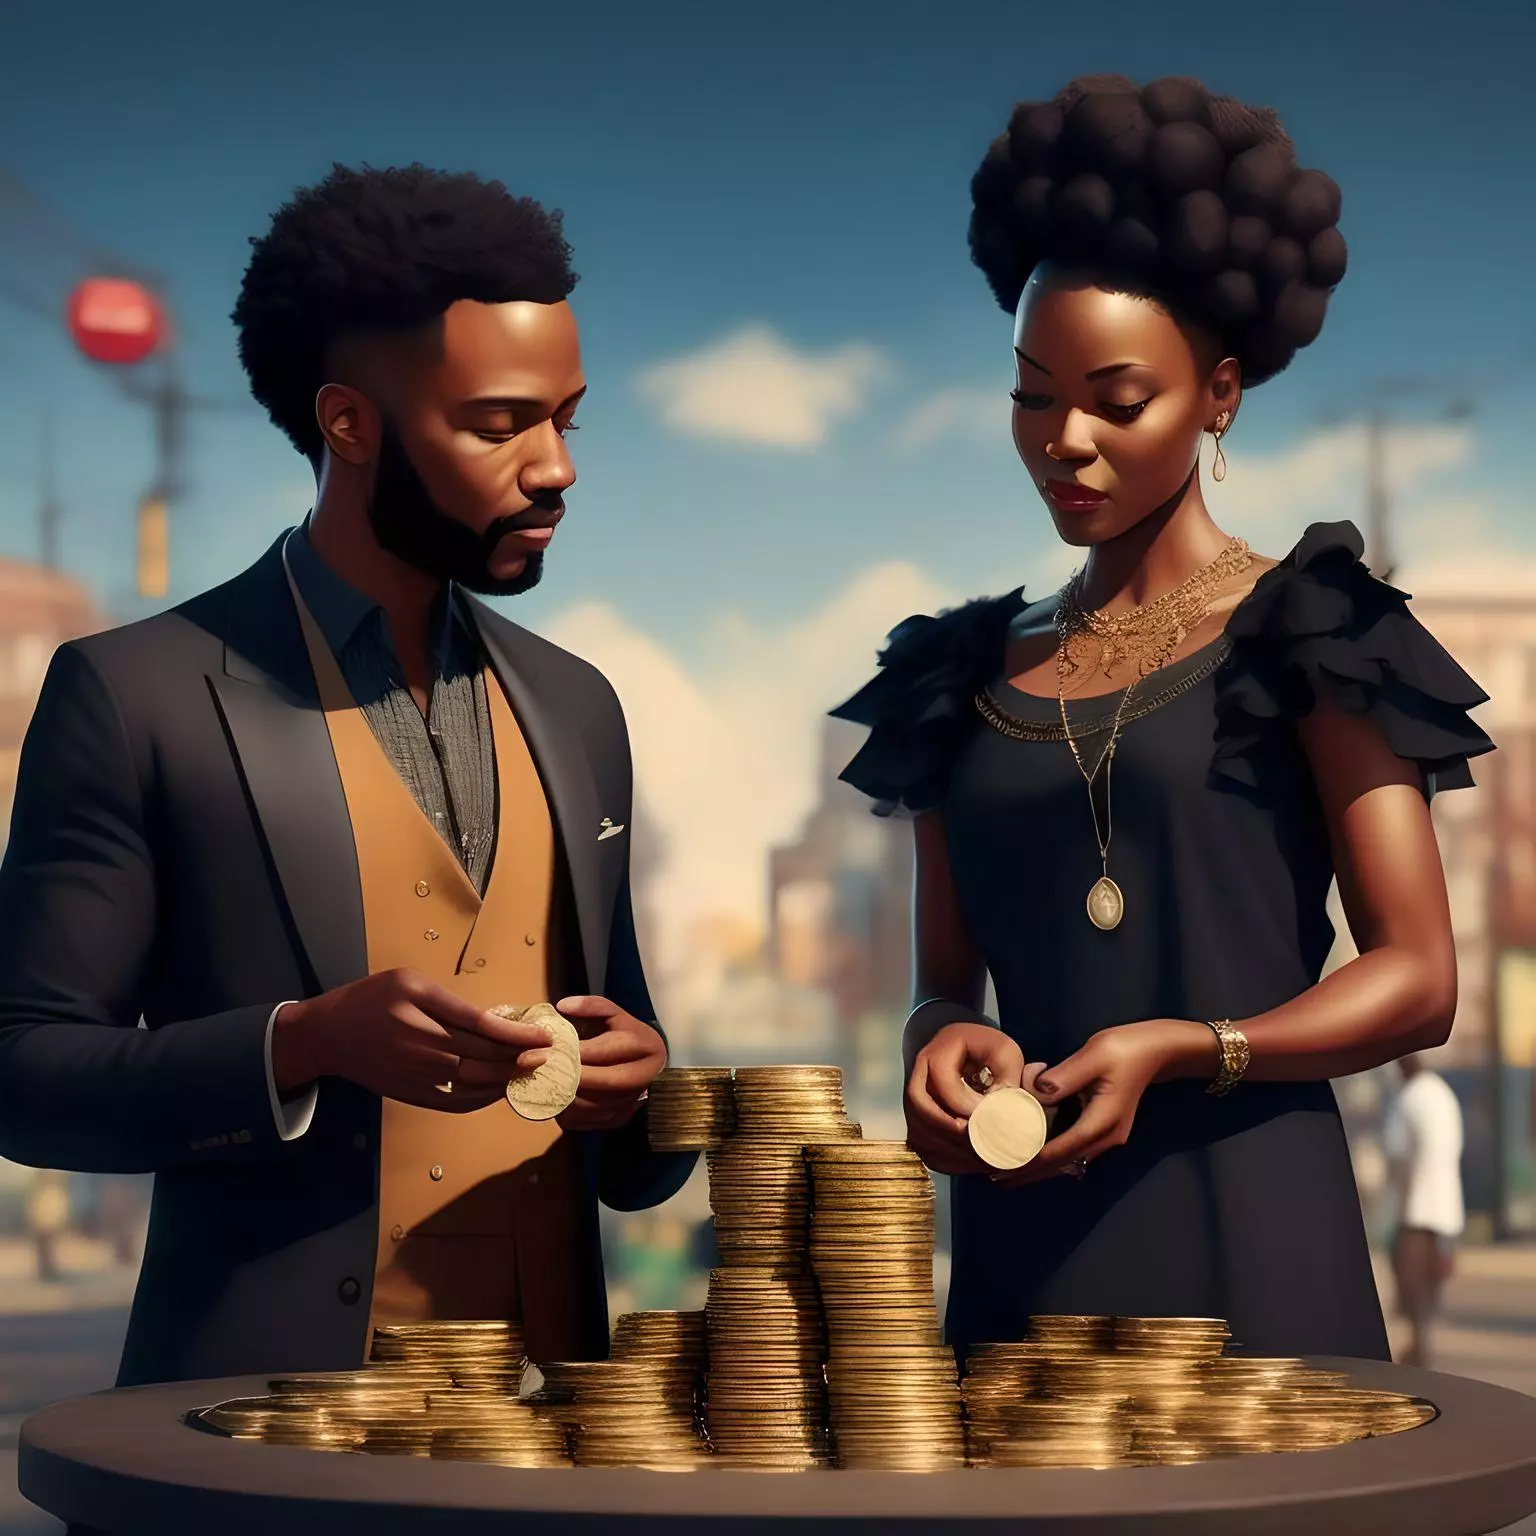 black couple counting coins showing how to handle financial problems in a relationship